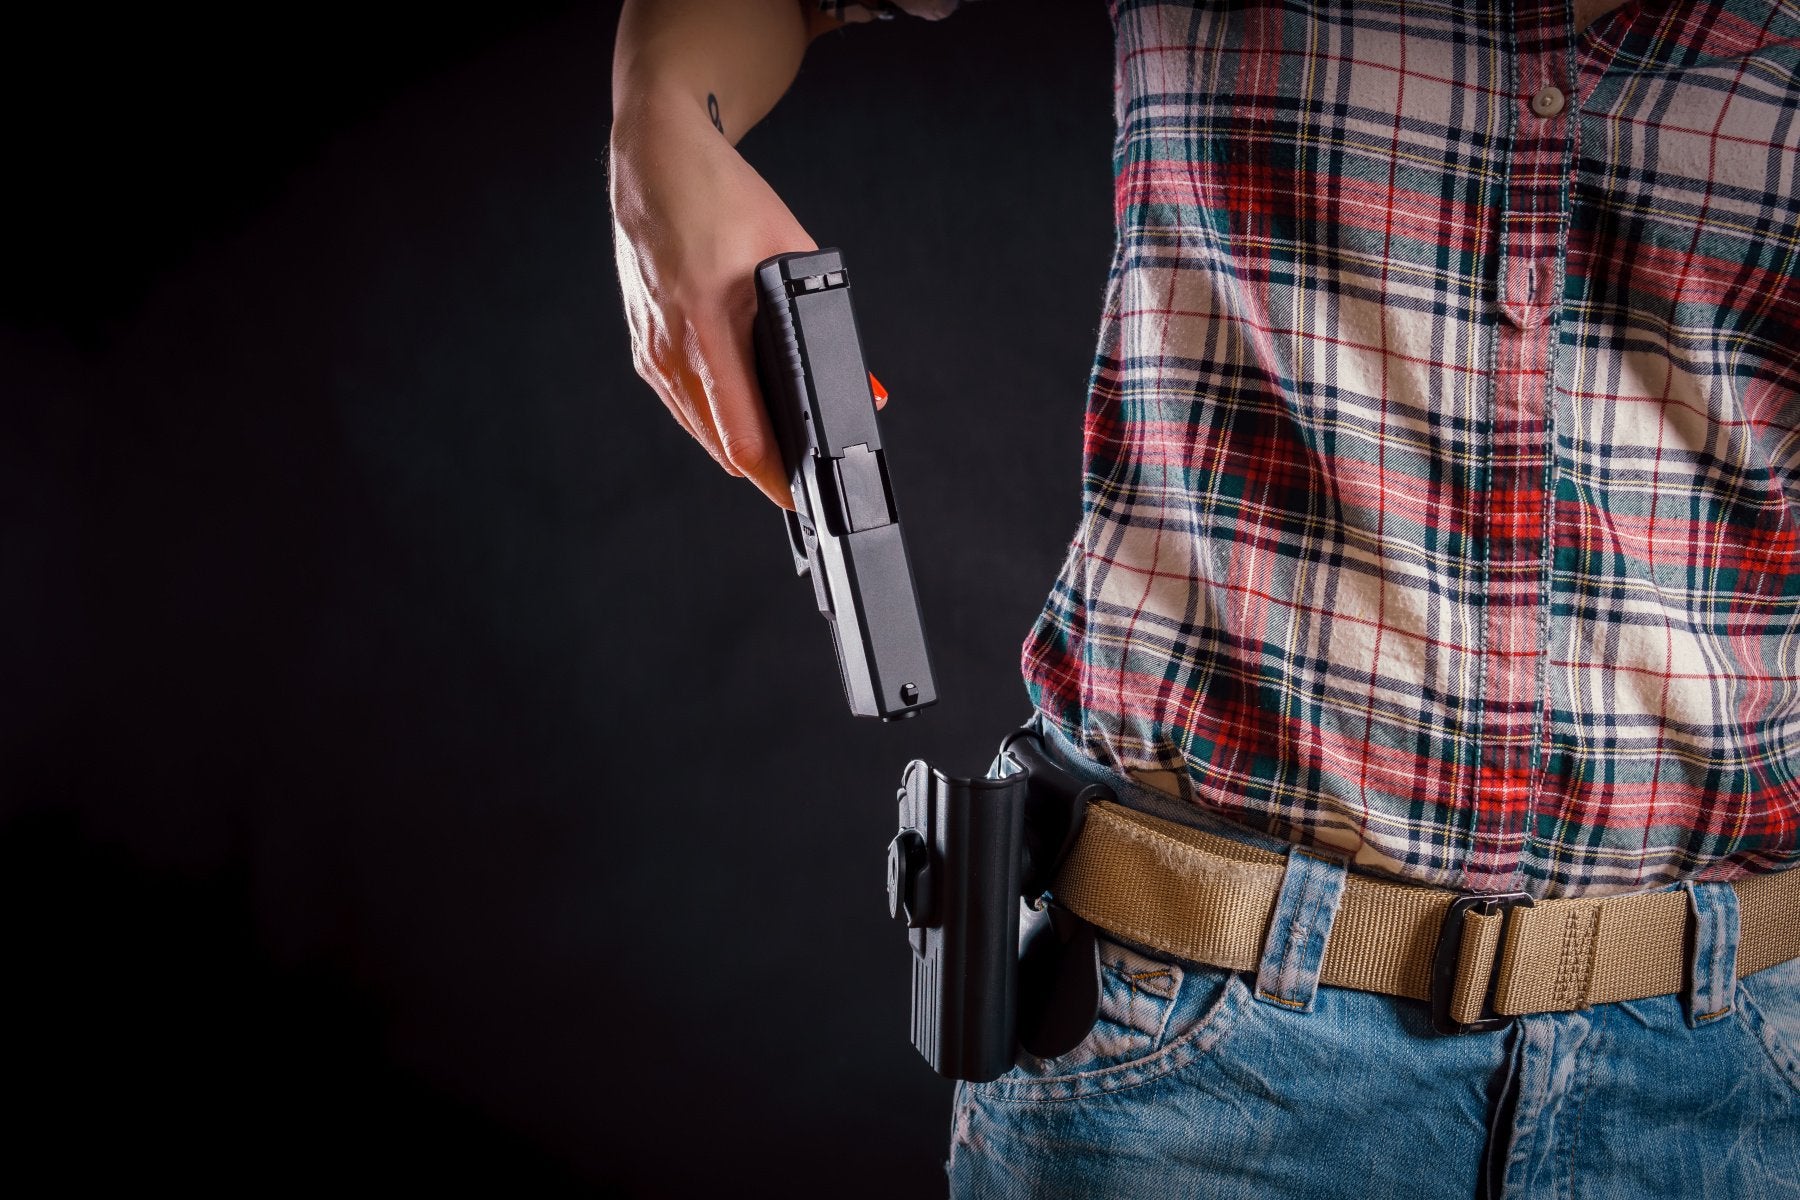 Woman removing gun from her holster